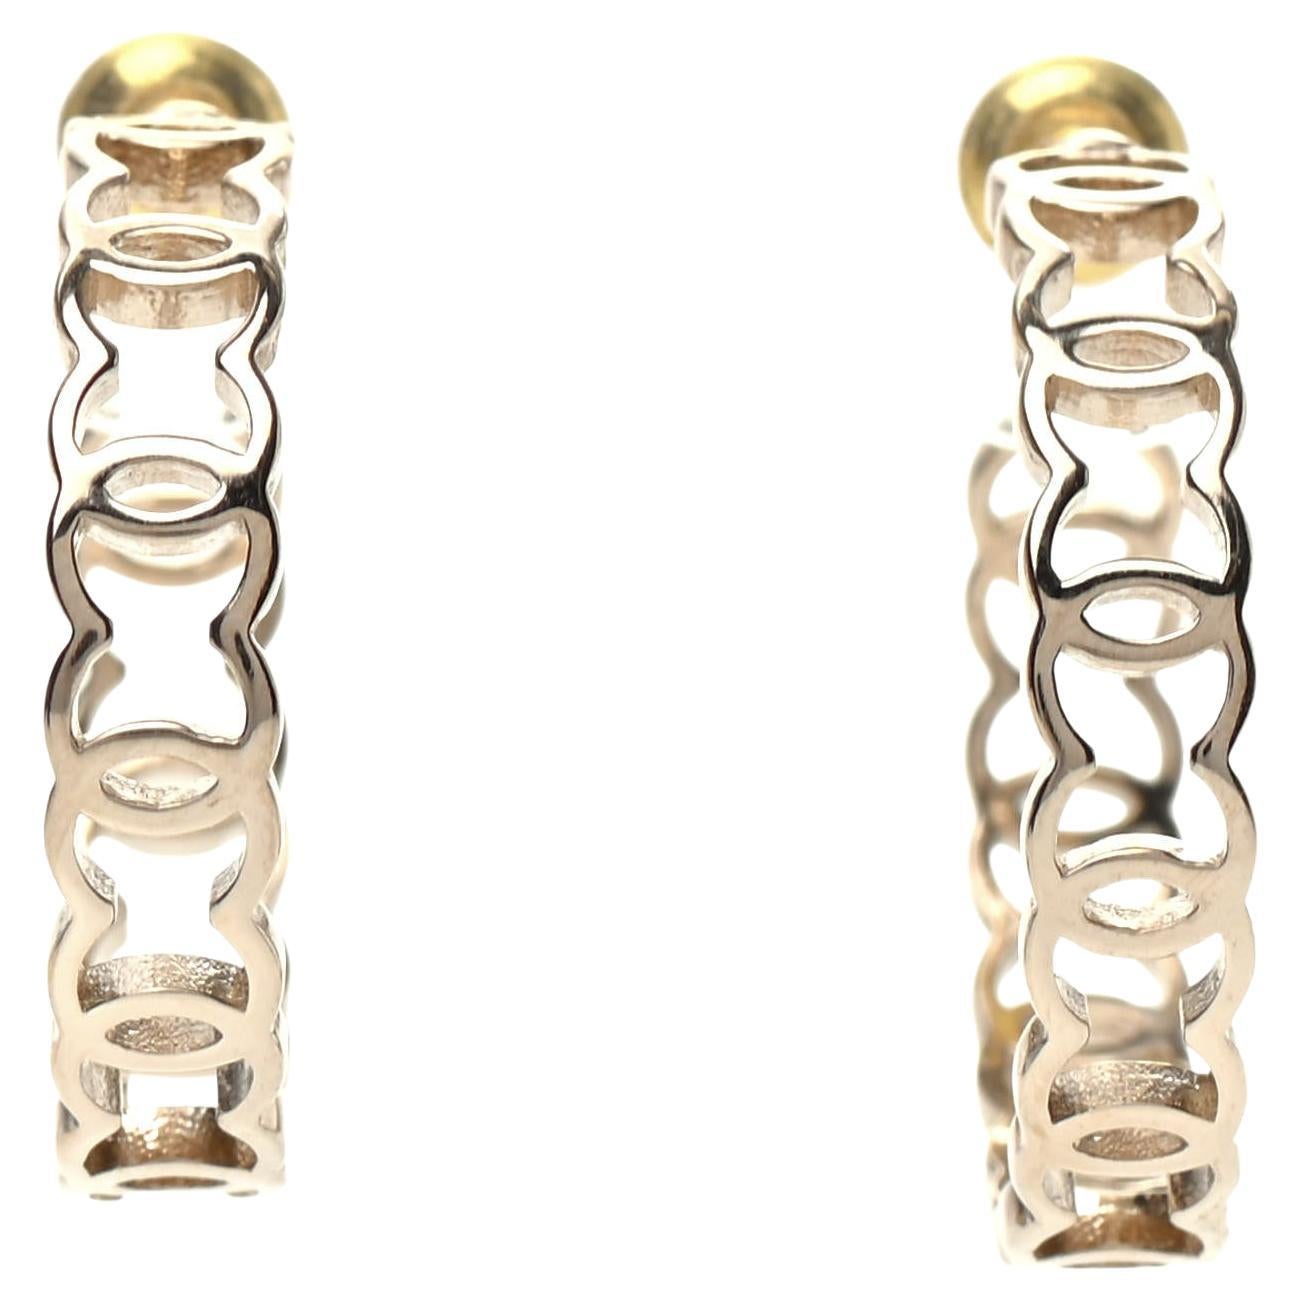 At Auction: Chanel, Chanel Gold-tone and Rhinestone 'CC' Earrings